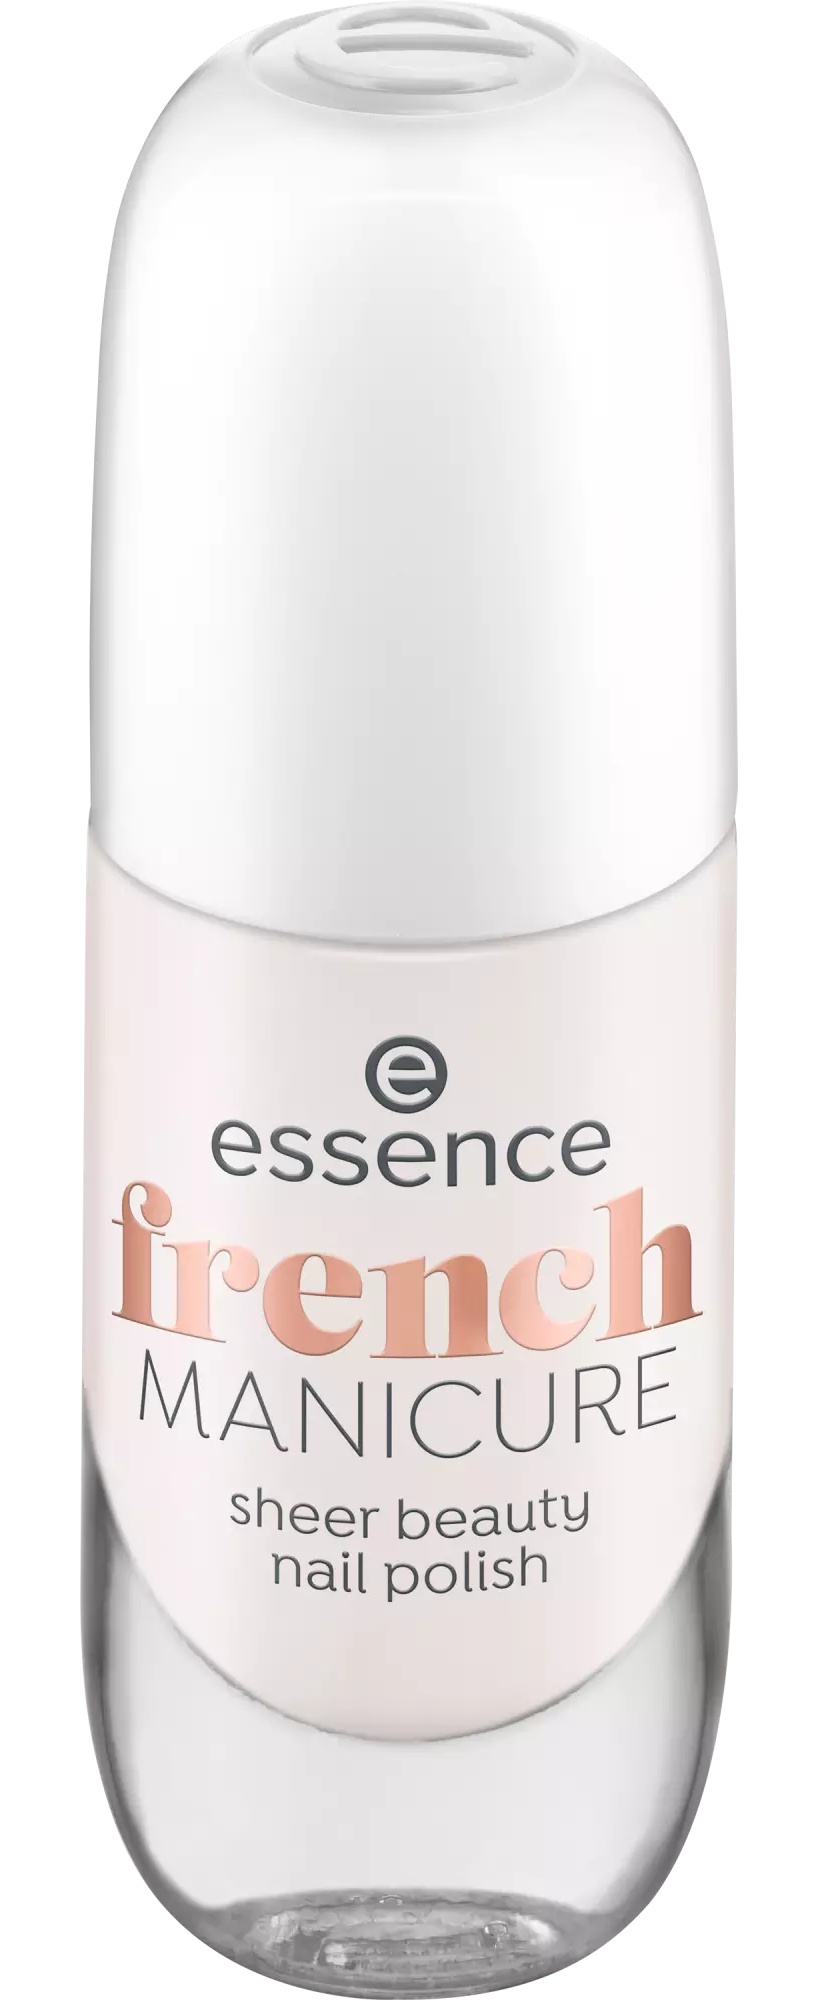 Essence French Manicure Sheer Beauty Nail Polish 02 Rosé On Ice